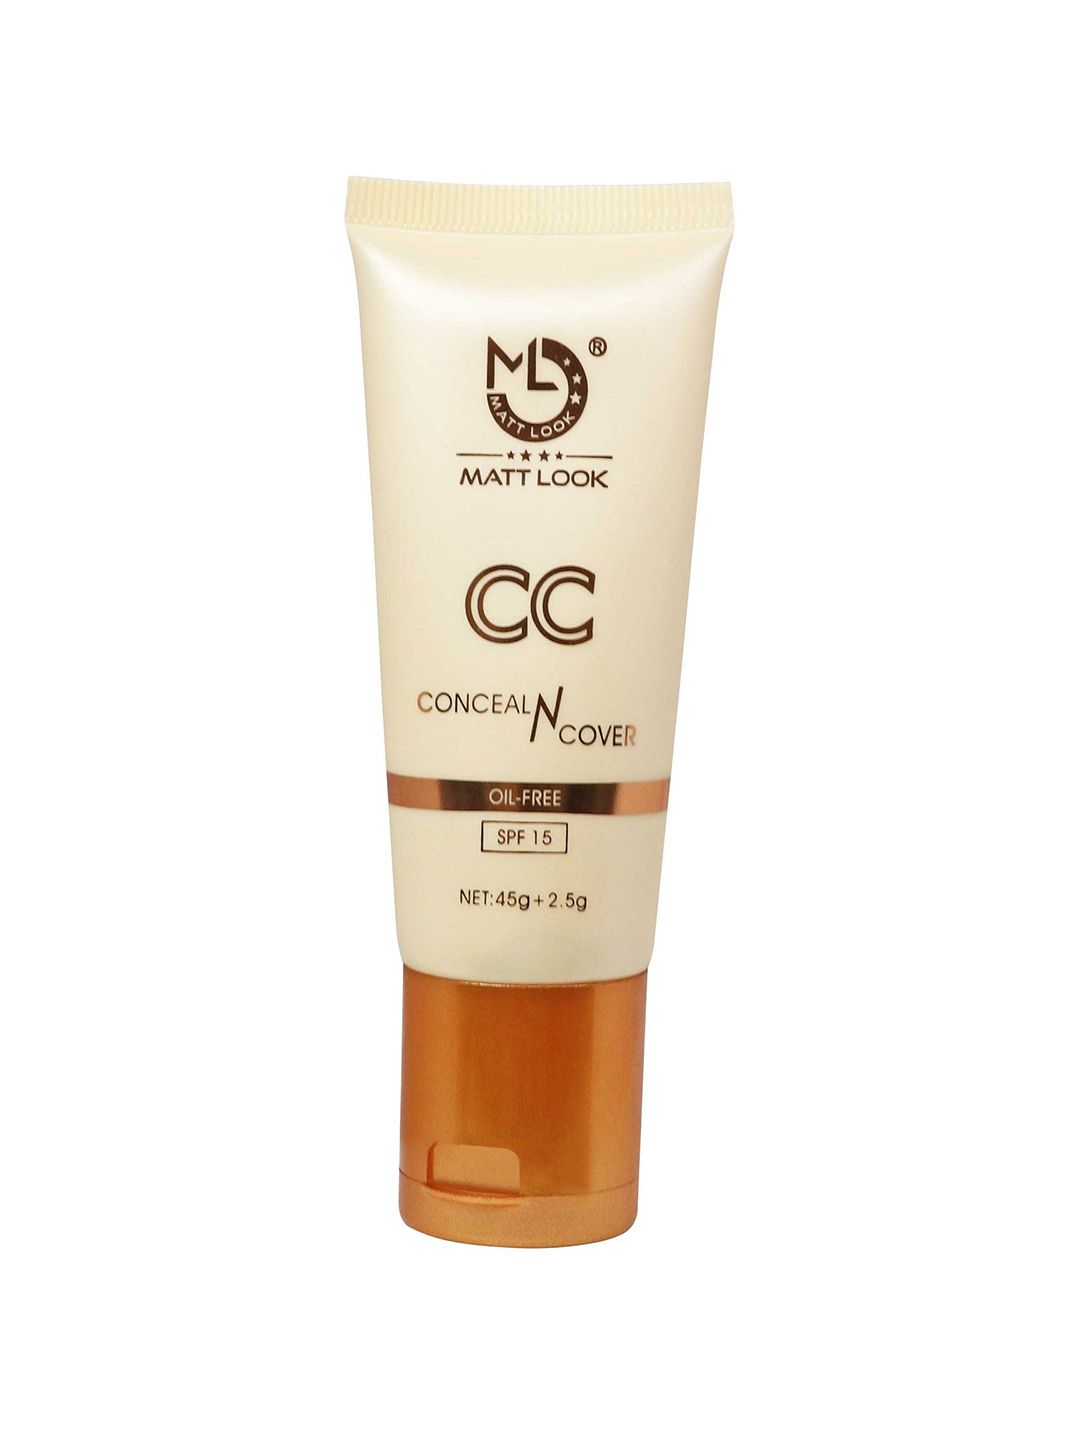 MATTLOOK Fair CC Conceal N Cover Oil-Free SPF-15, 45gm+2.5gm Price in India